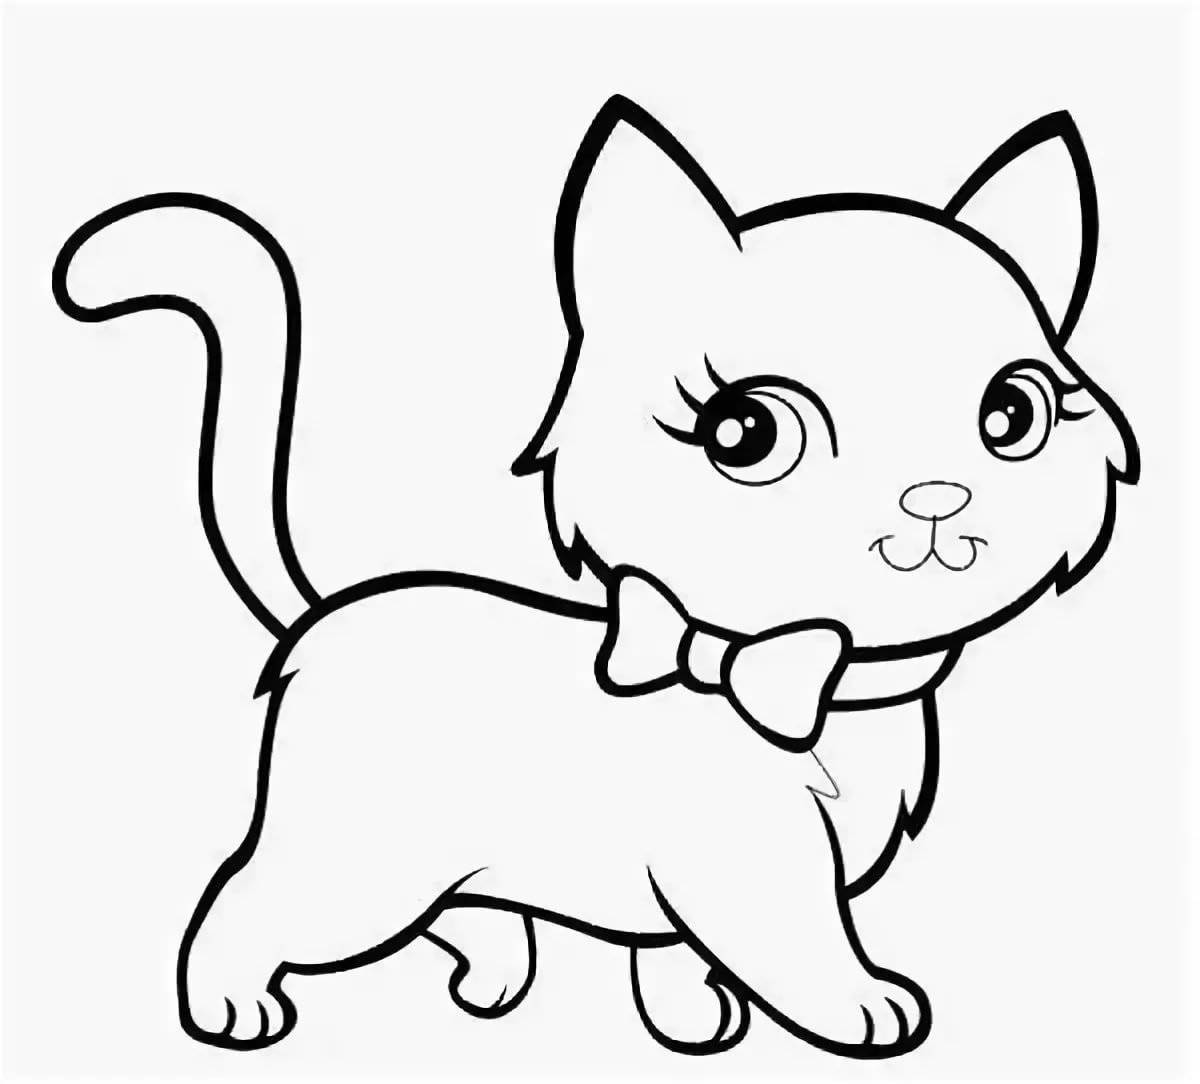 Coloring book playful cat for kids